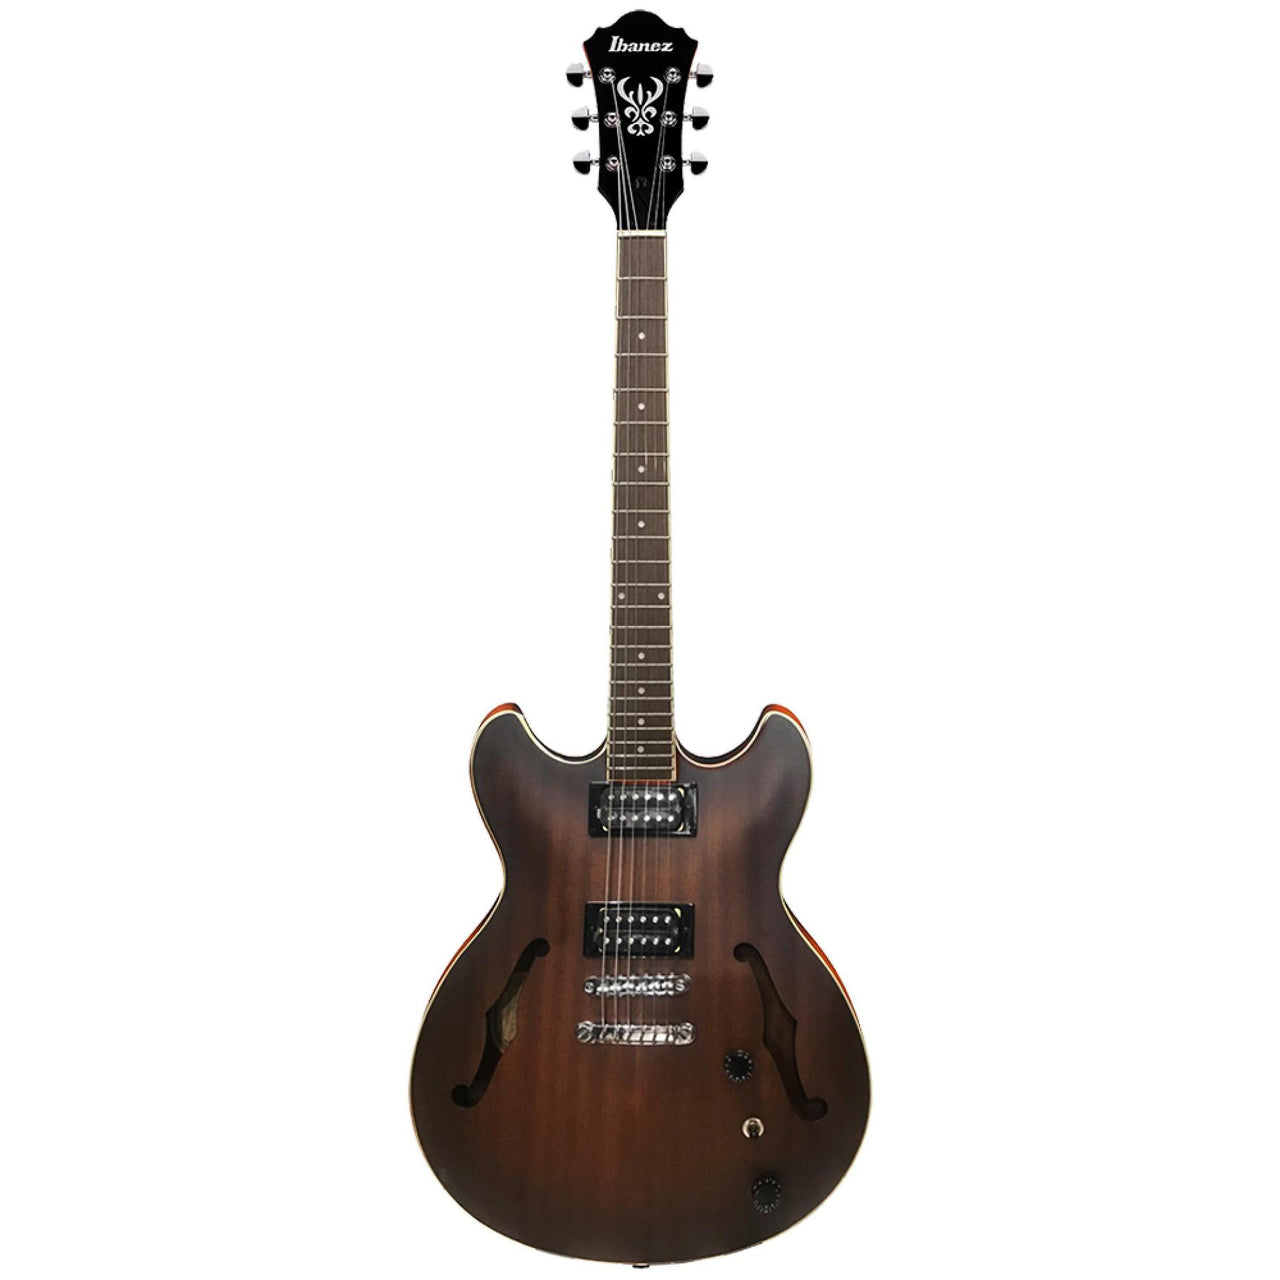 Guitarra Electrica Ibanez "artcore" Caf Mate, As53-tf